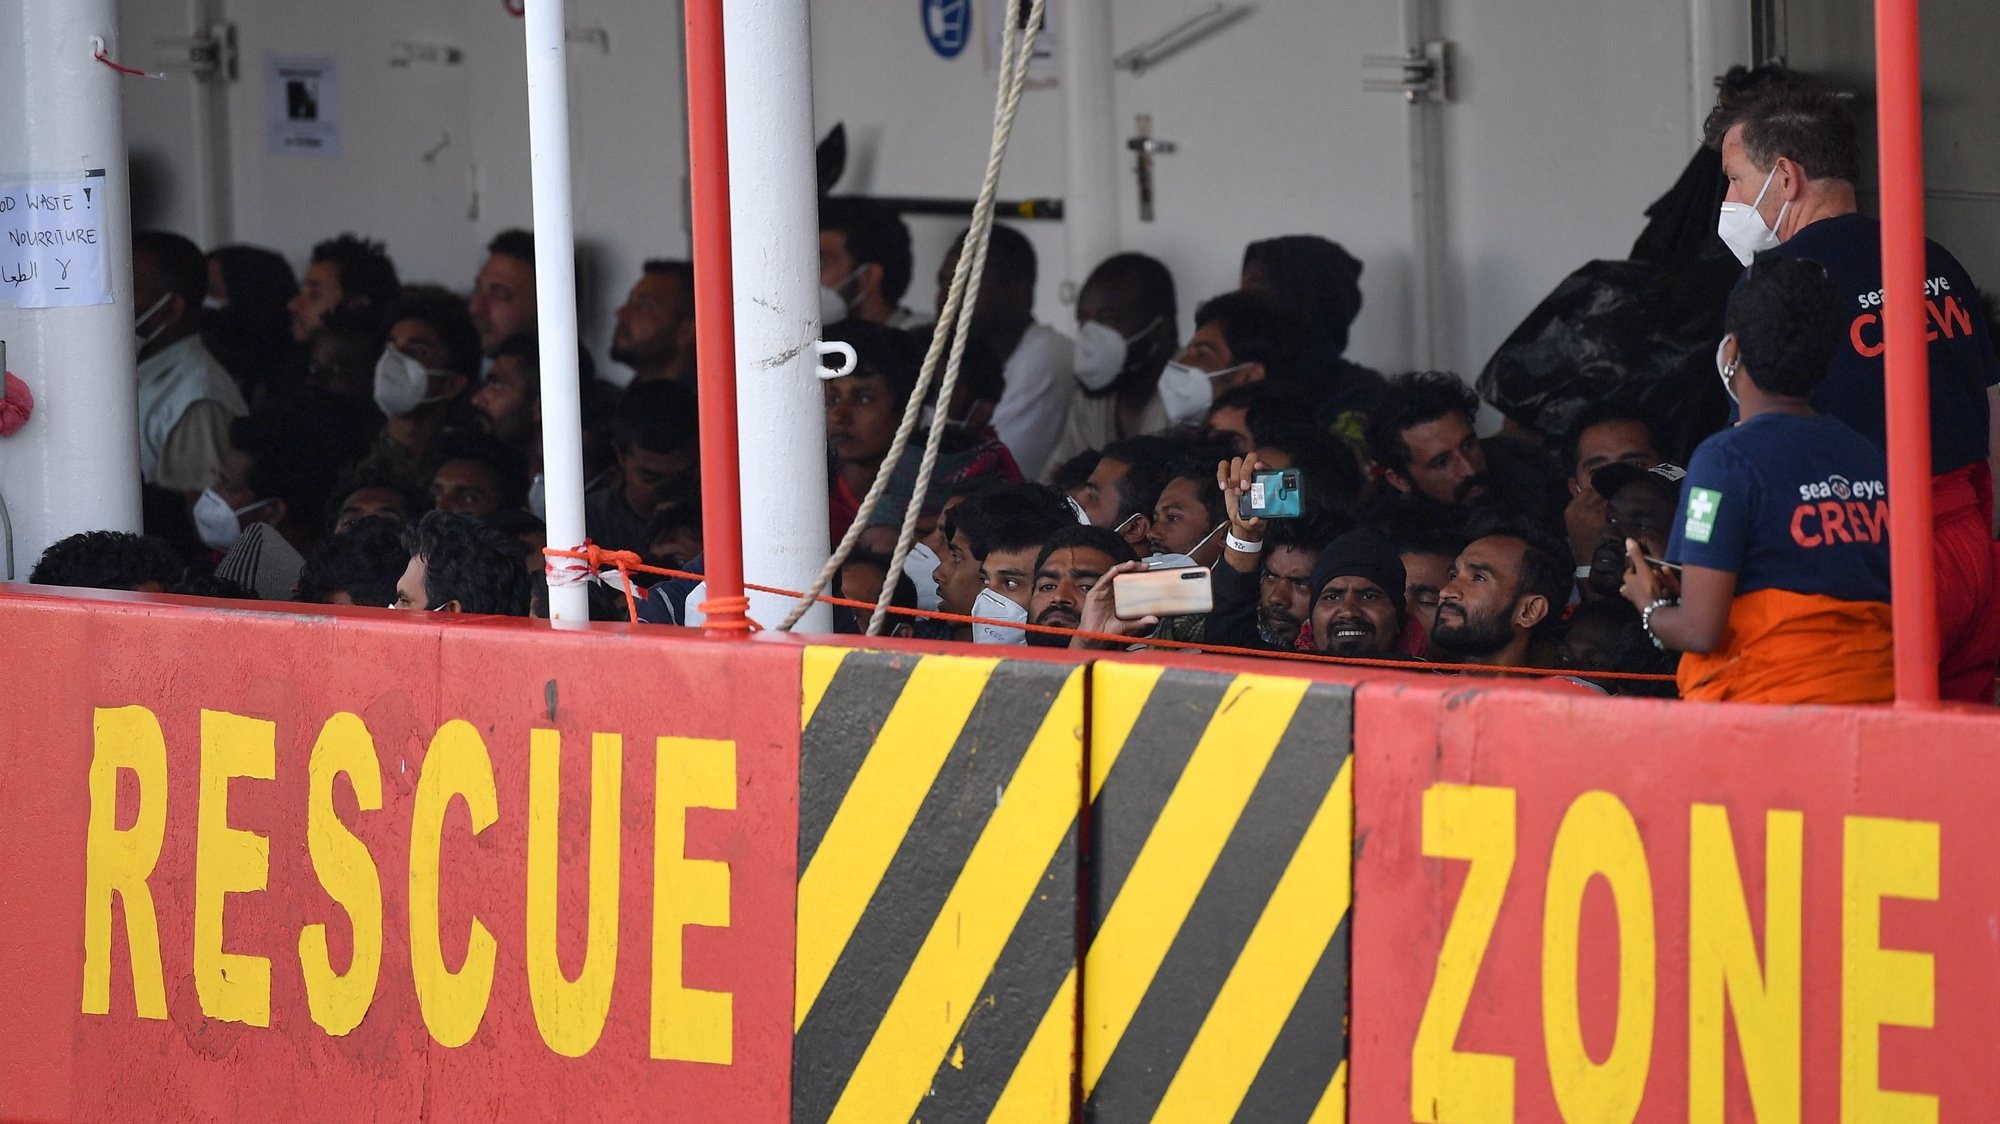 epa10027608 People wait to disembark the Sea Eye 4 rescue ship with 476 migrants on board, as it docks at the port of Messina, Italy, 22 June 2022. Another ship, the Sea Watch 4, carrying over 300 people, was still waiting for permission to dock.  EPA/CARMELO IMBESI